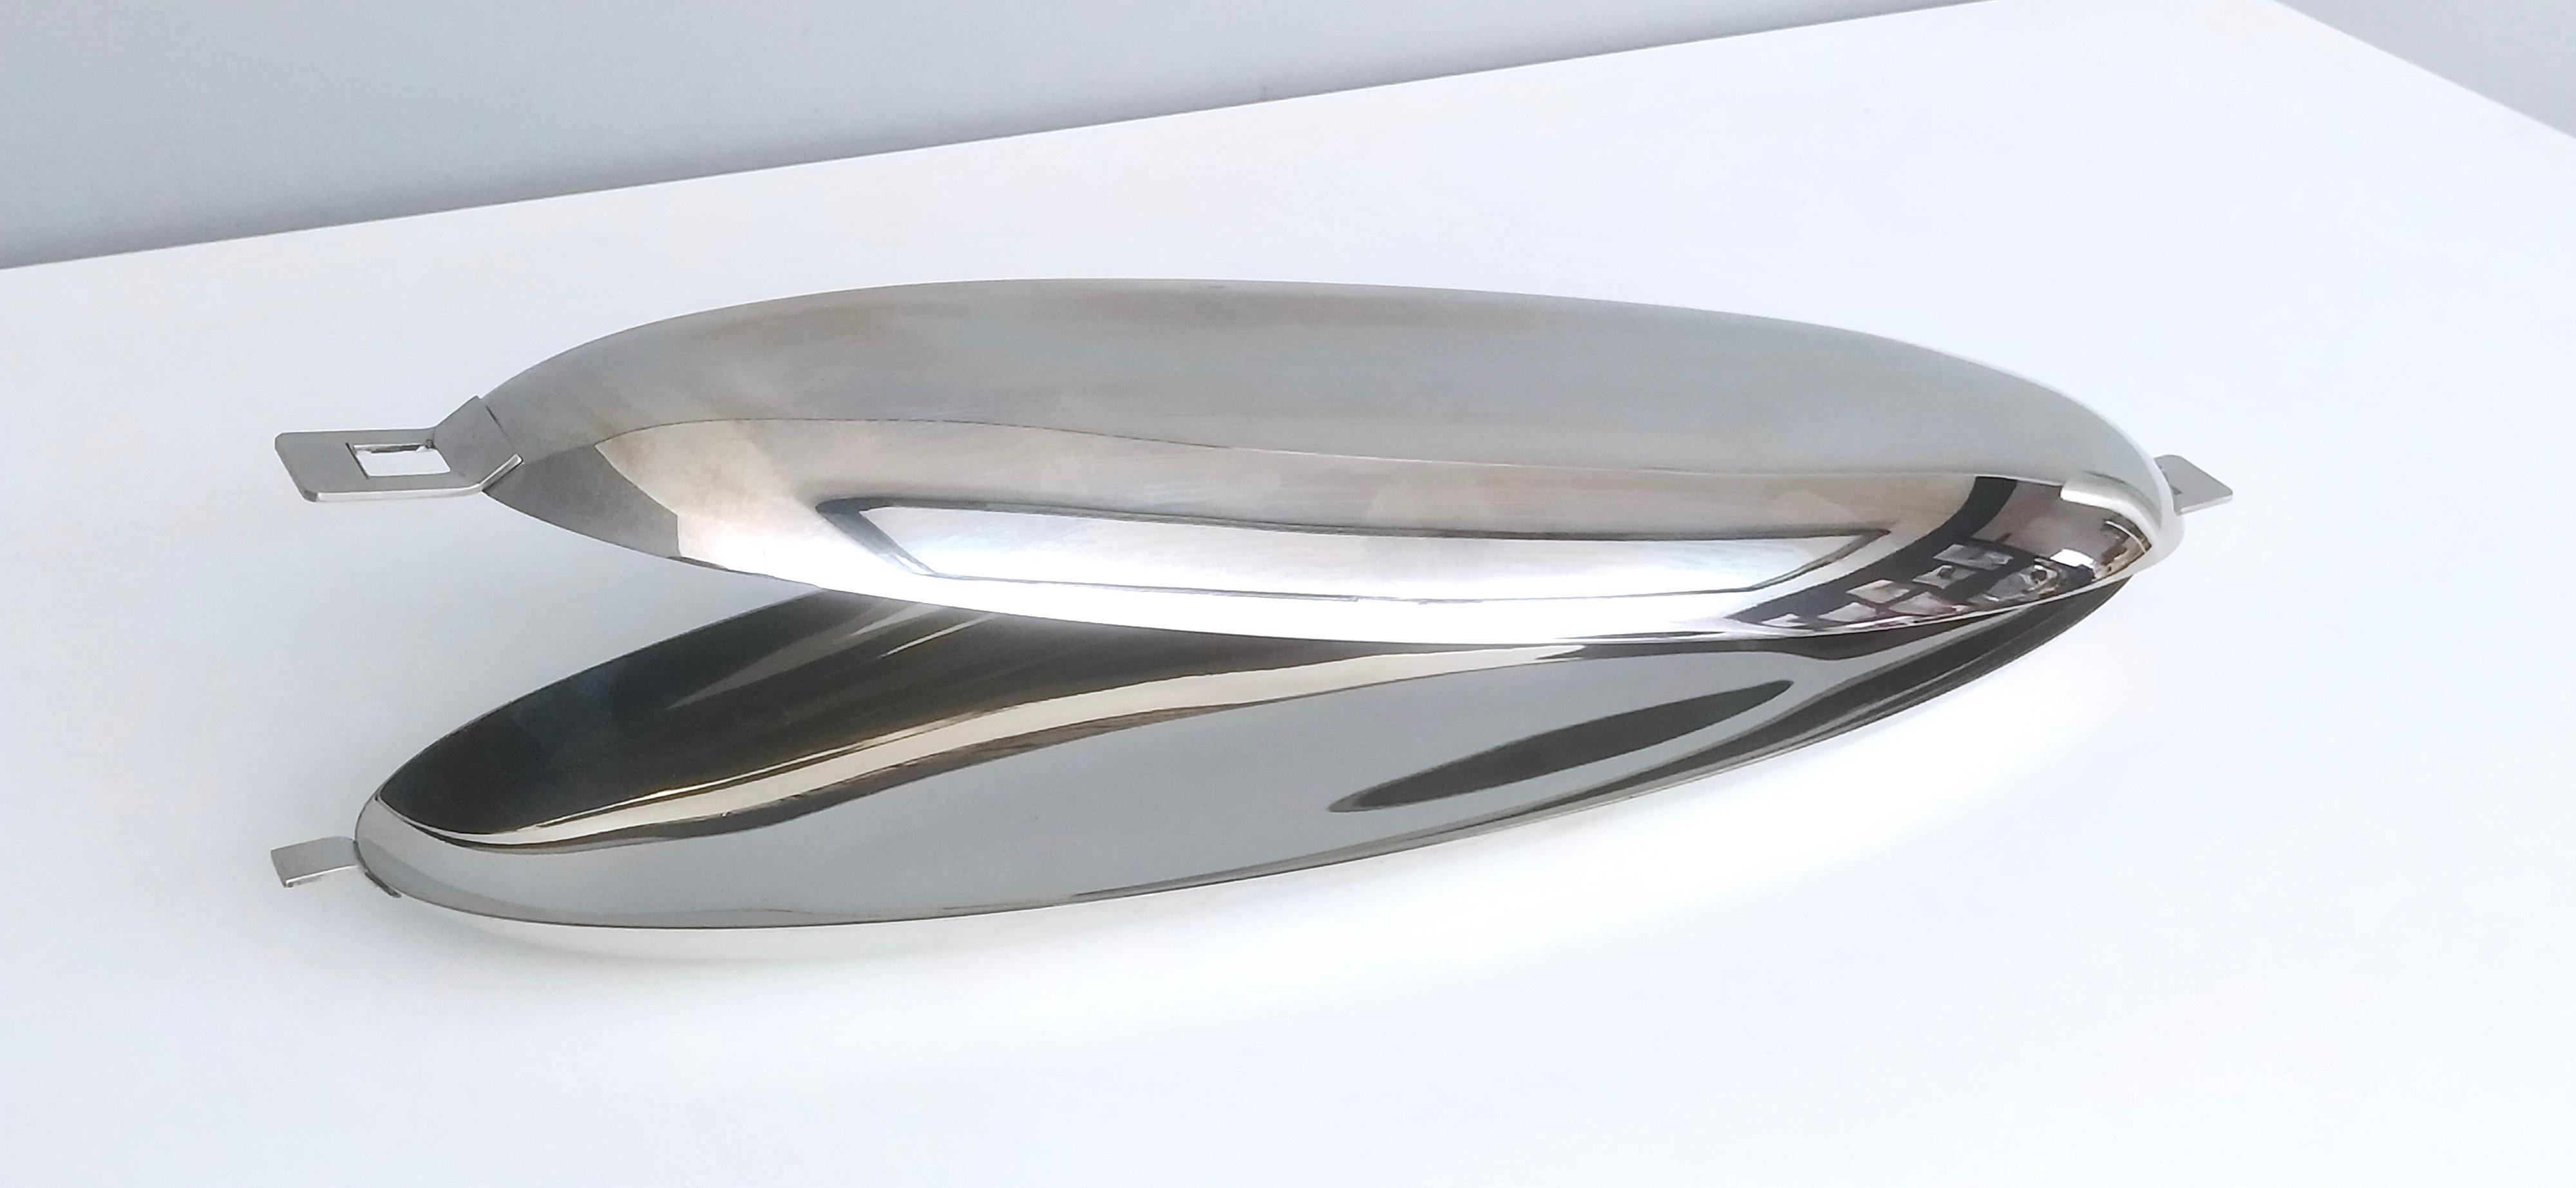 This is an elegant stainless steel fish poacher by Roberto Sambonet for Sambonet. It is perfect to serve and Cook fish, but also other dishes. 
It has a beautiful shell shape and the two halves are designed to provide three different opening